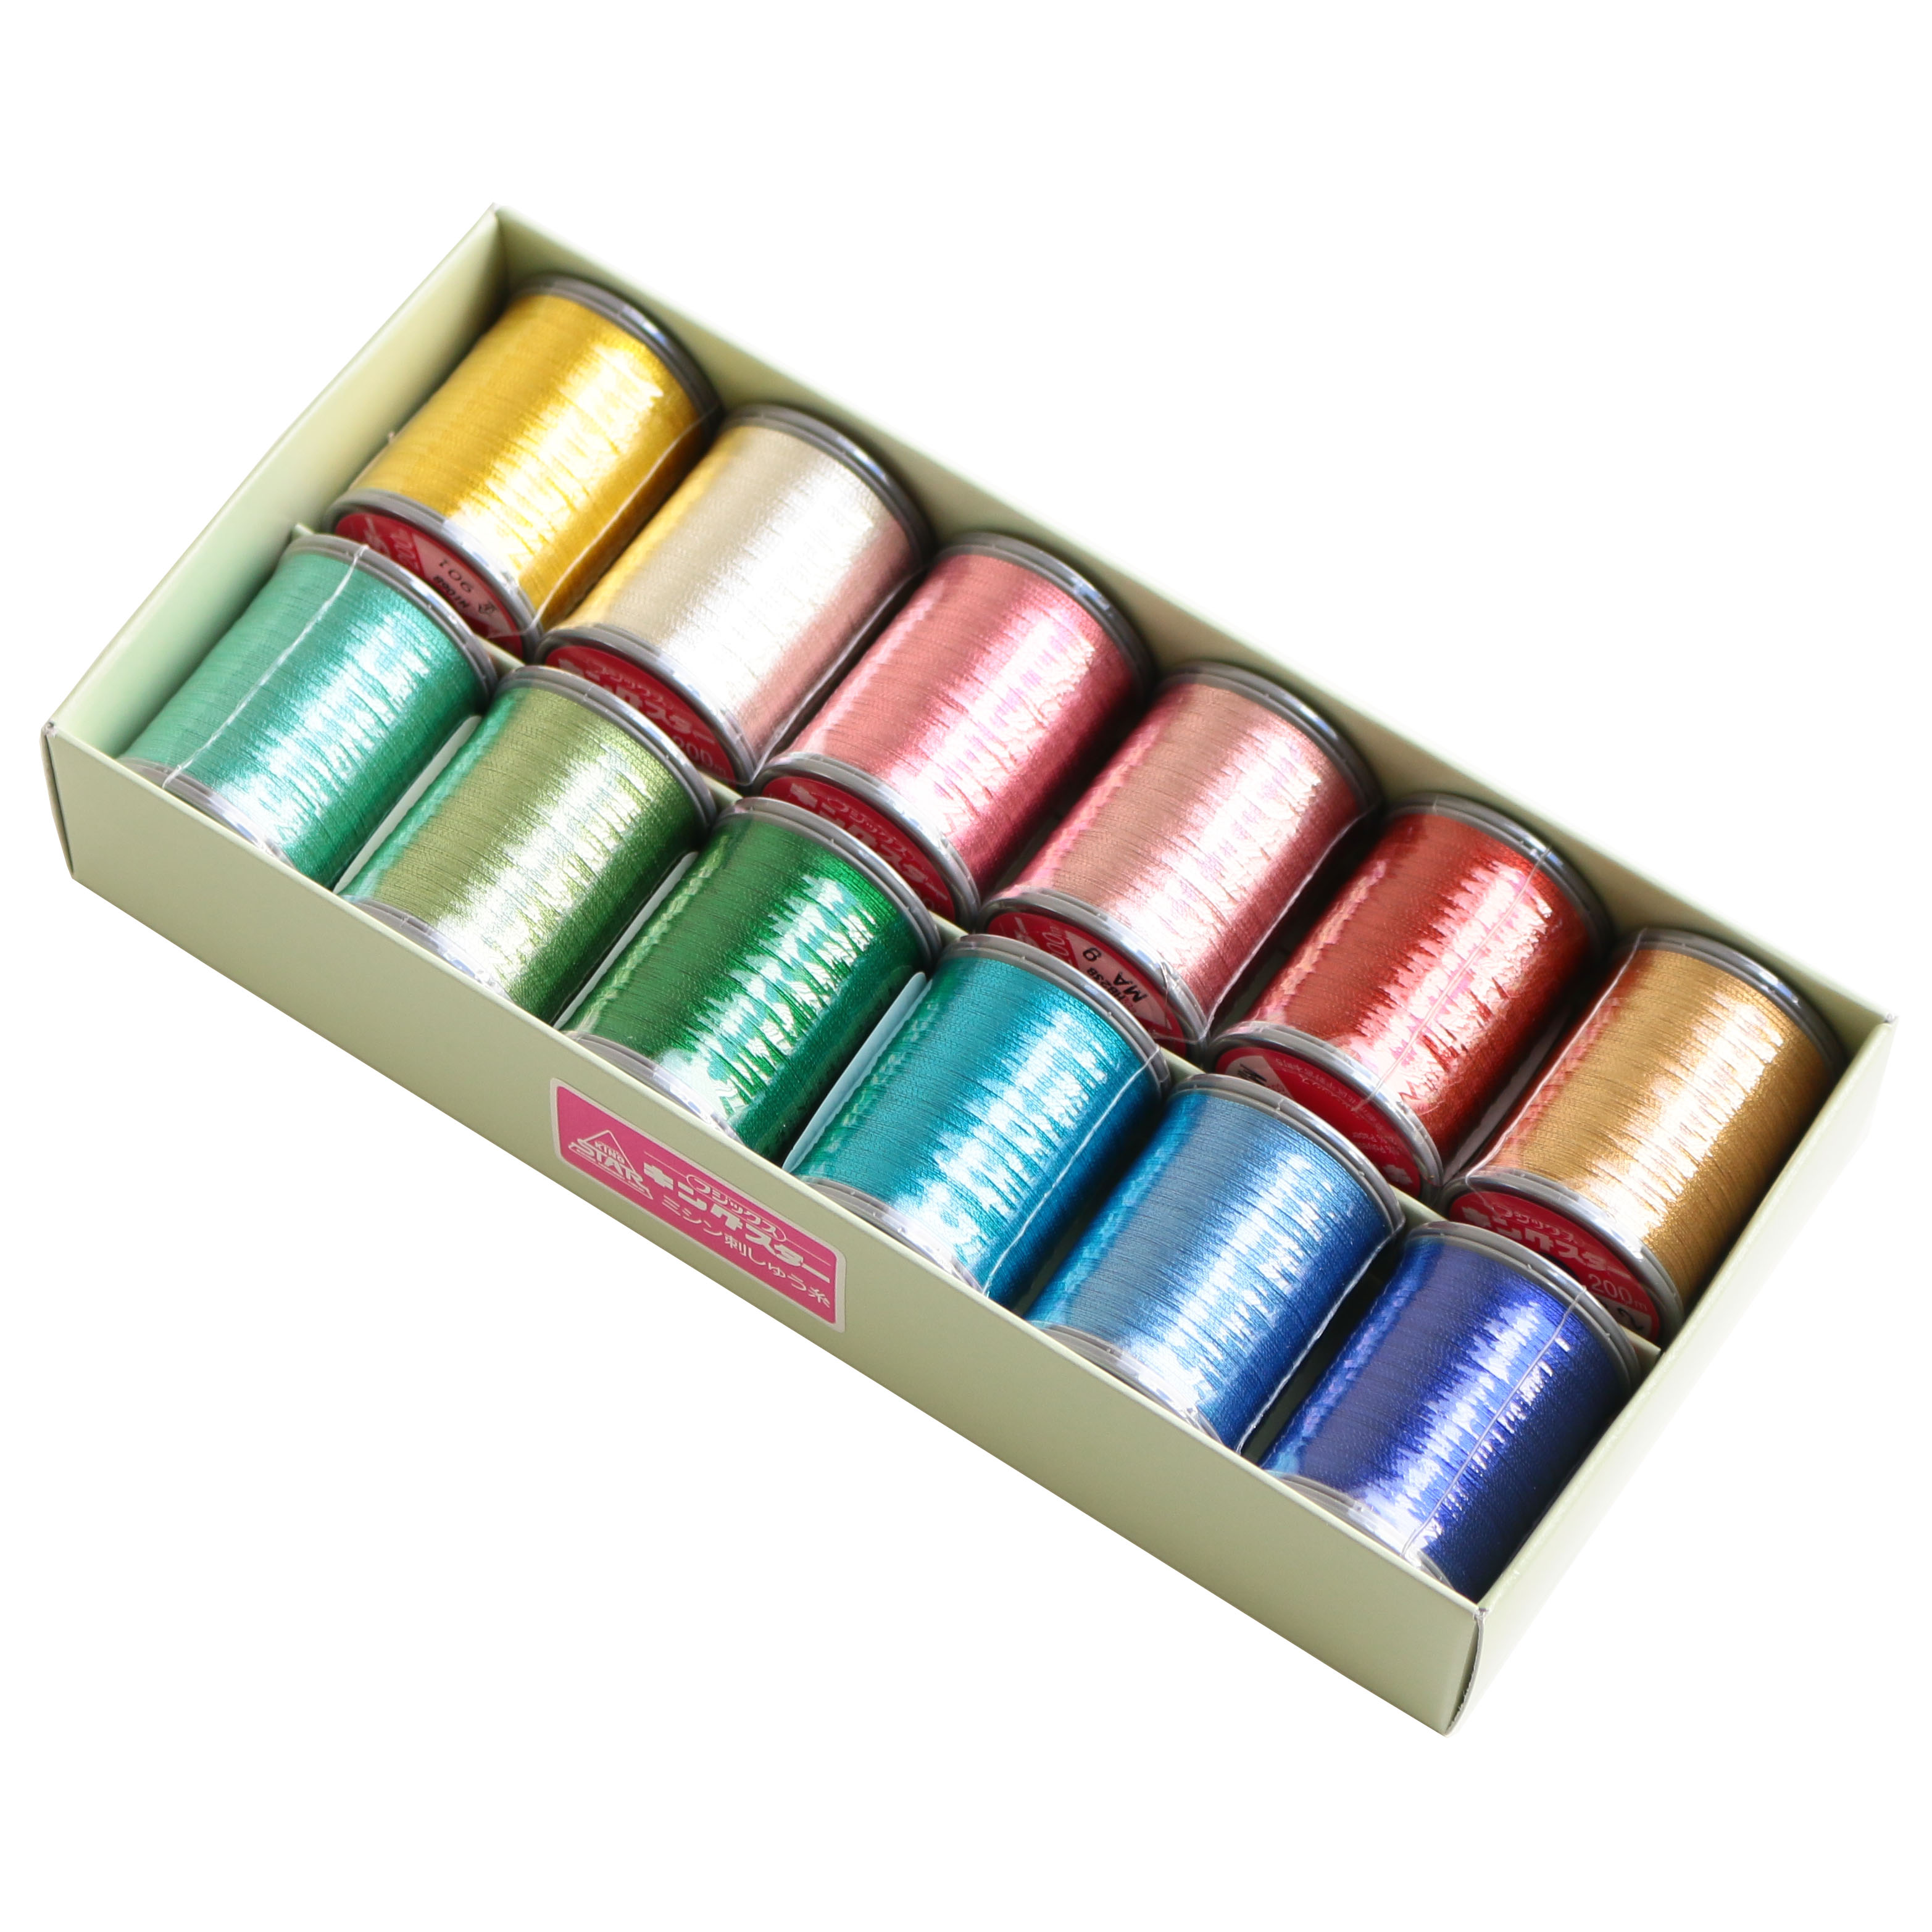 FK15121 King Star decorative sewing machine embroidery thread, glitter 12 set, metallic color, 200m, 12 colors (set)